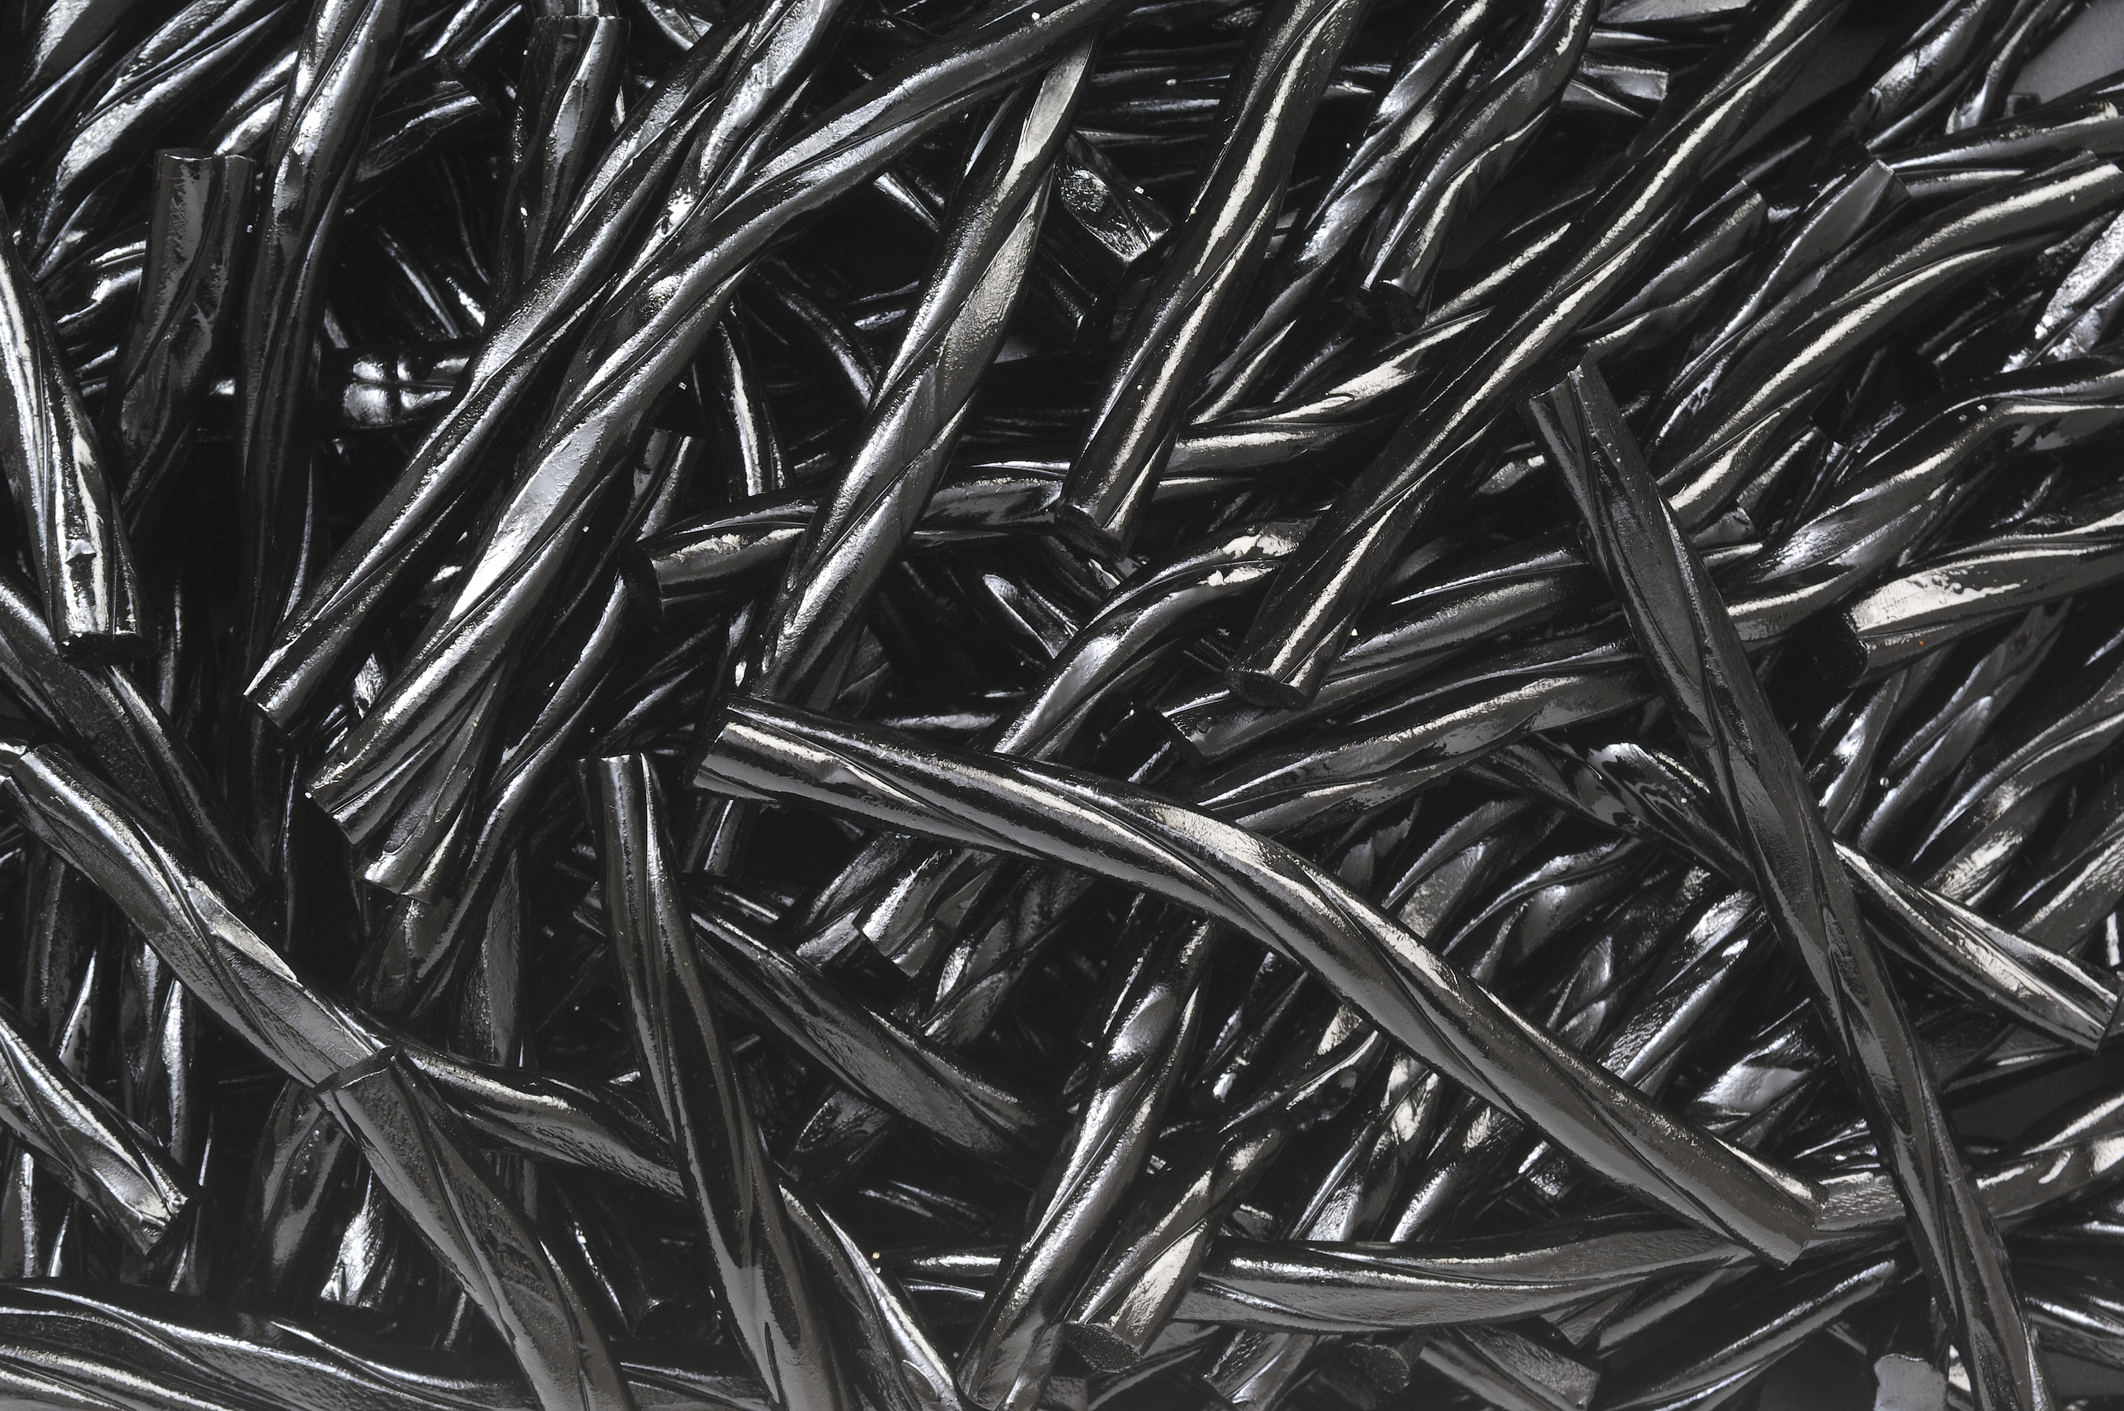 Close-up of a pile of black licorice candy sticks